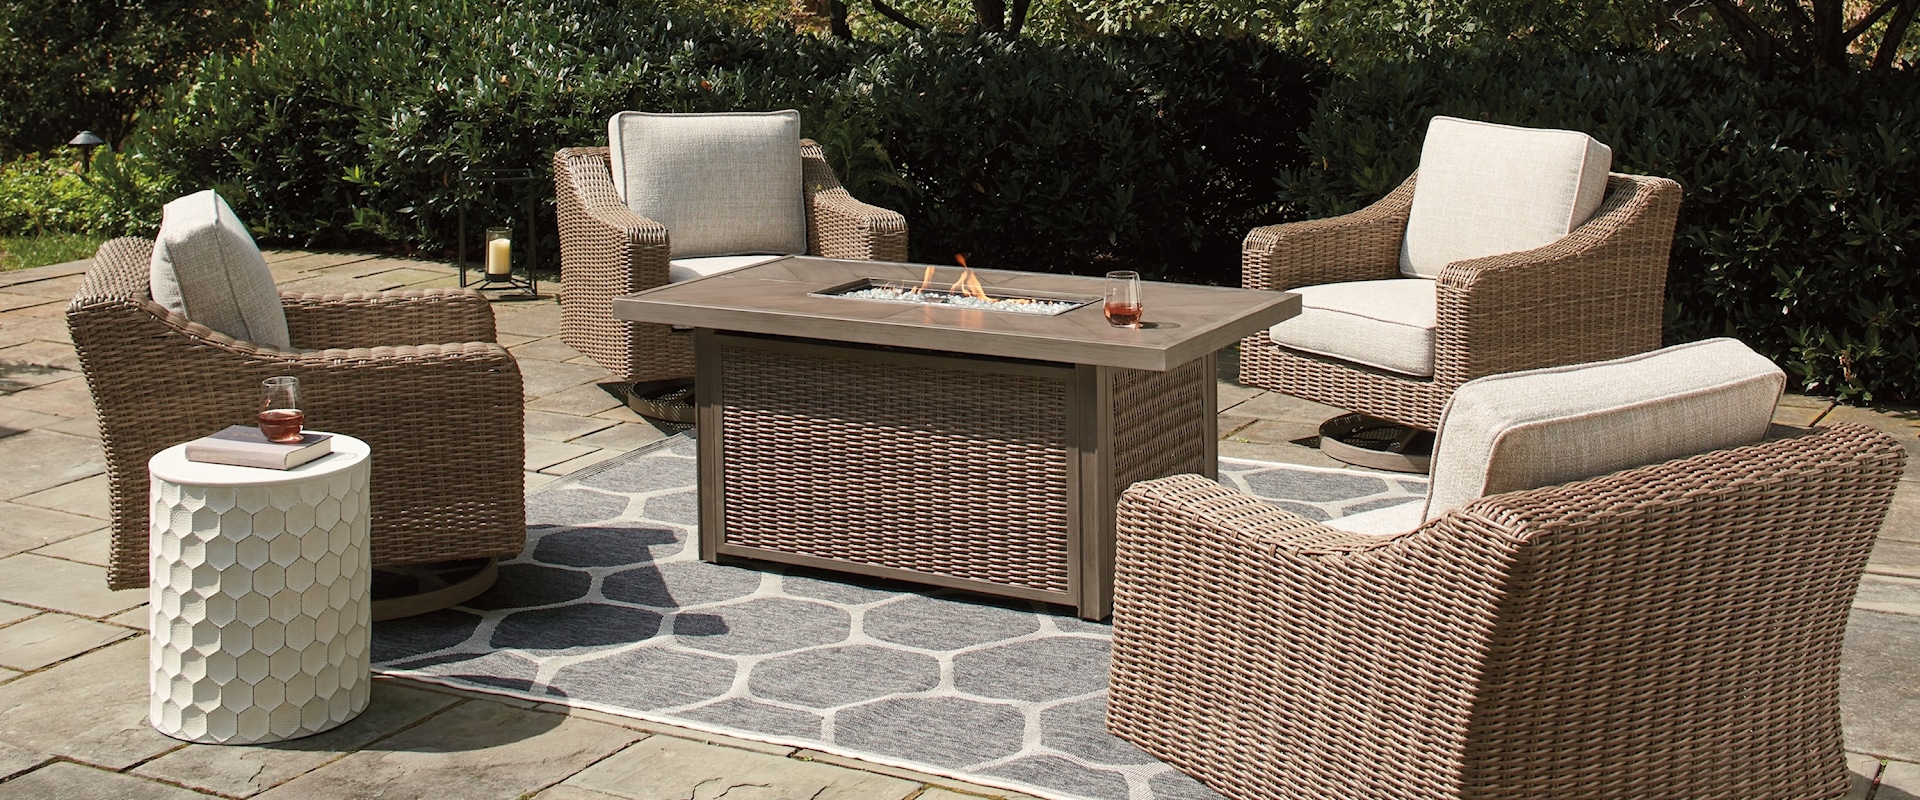 5-Piece Outdoor Fire Pit Table with 4 Chairs